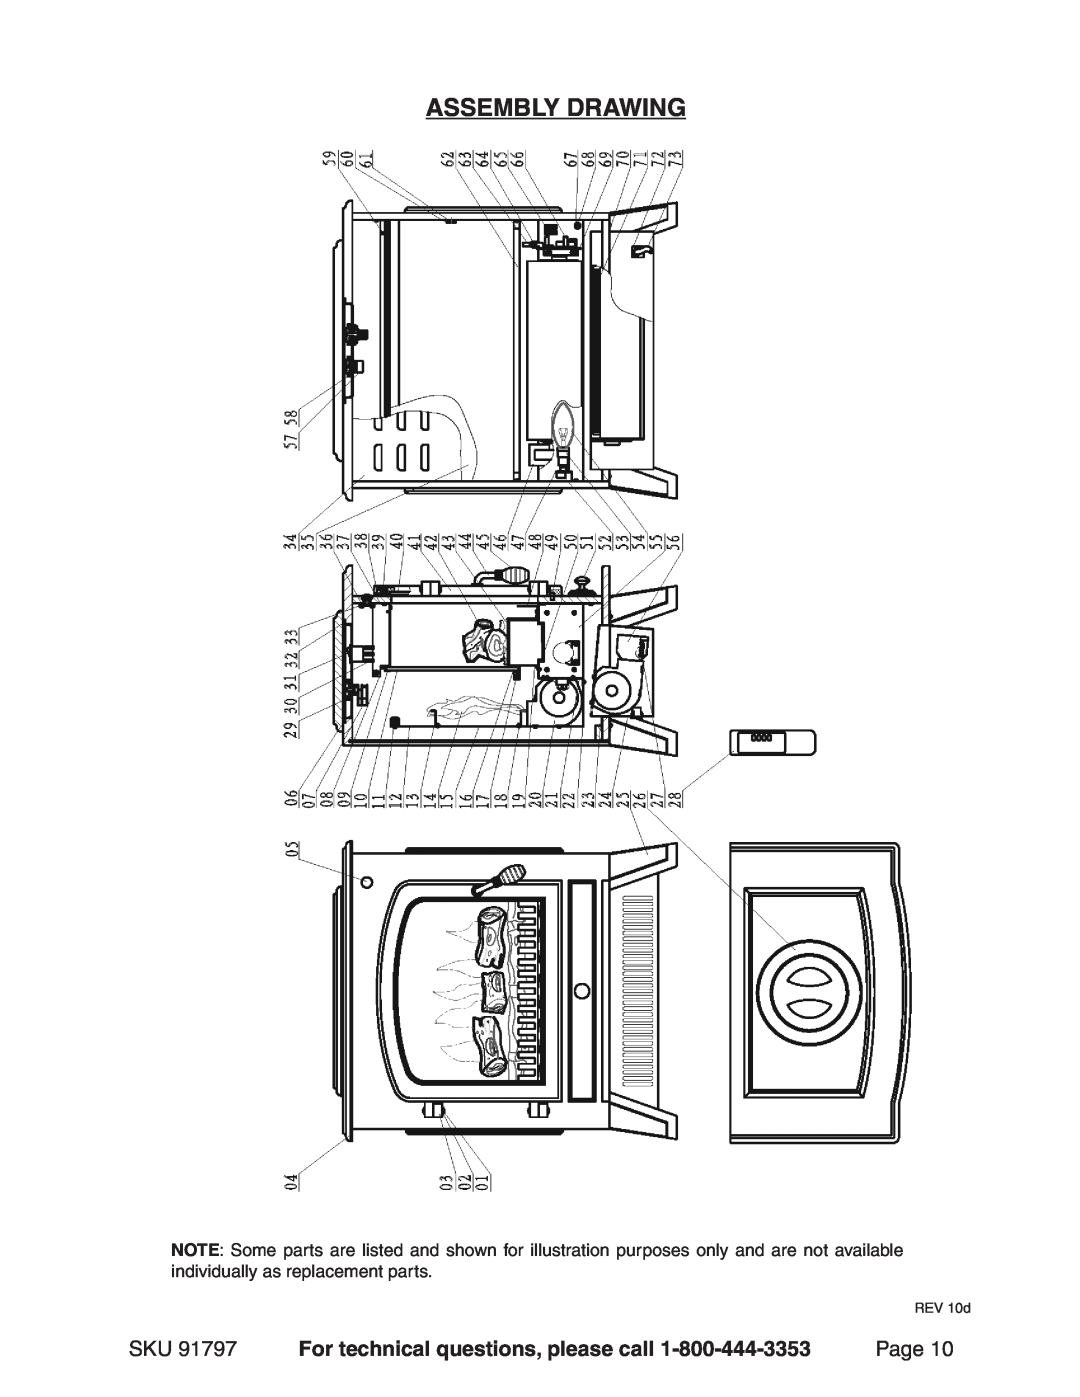 Harbor Freight Tools 91797 operating instructions Assembly Drawing, For technical questions, please call, Page, REV 10d 